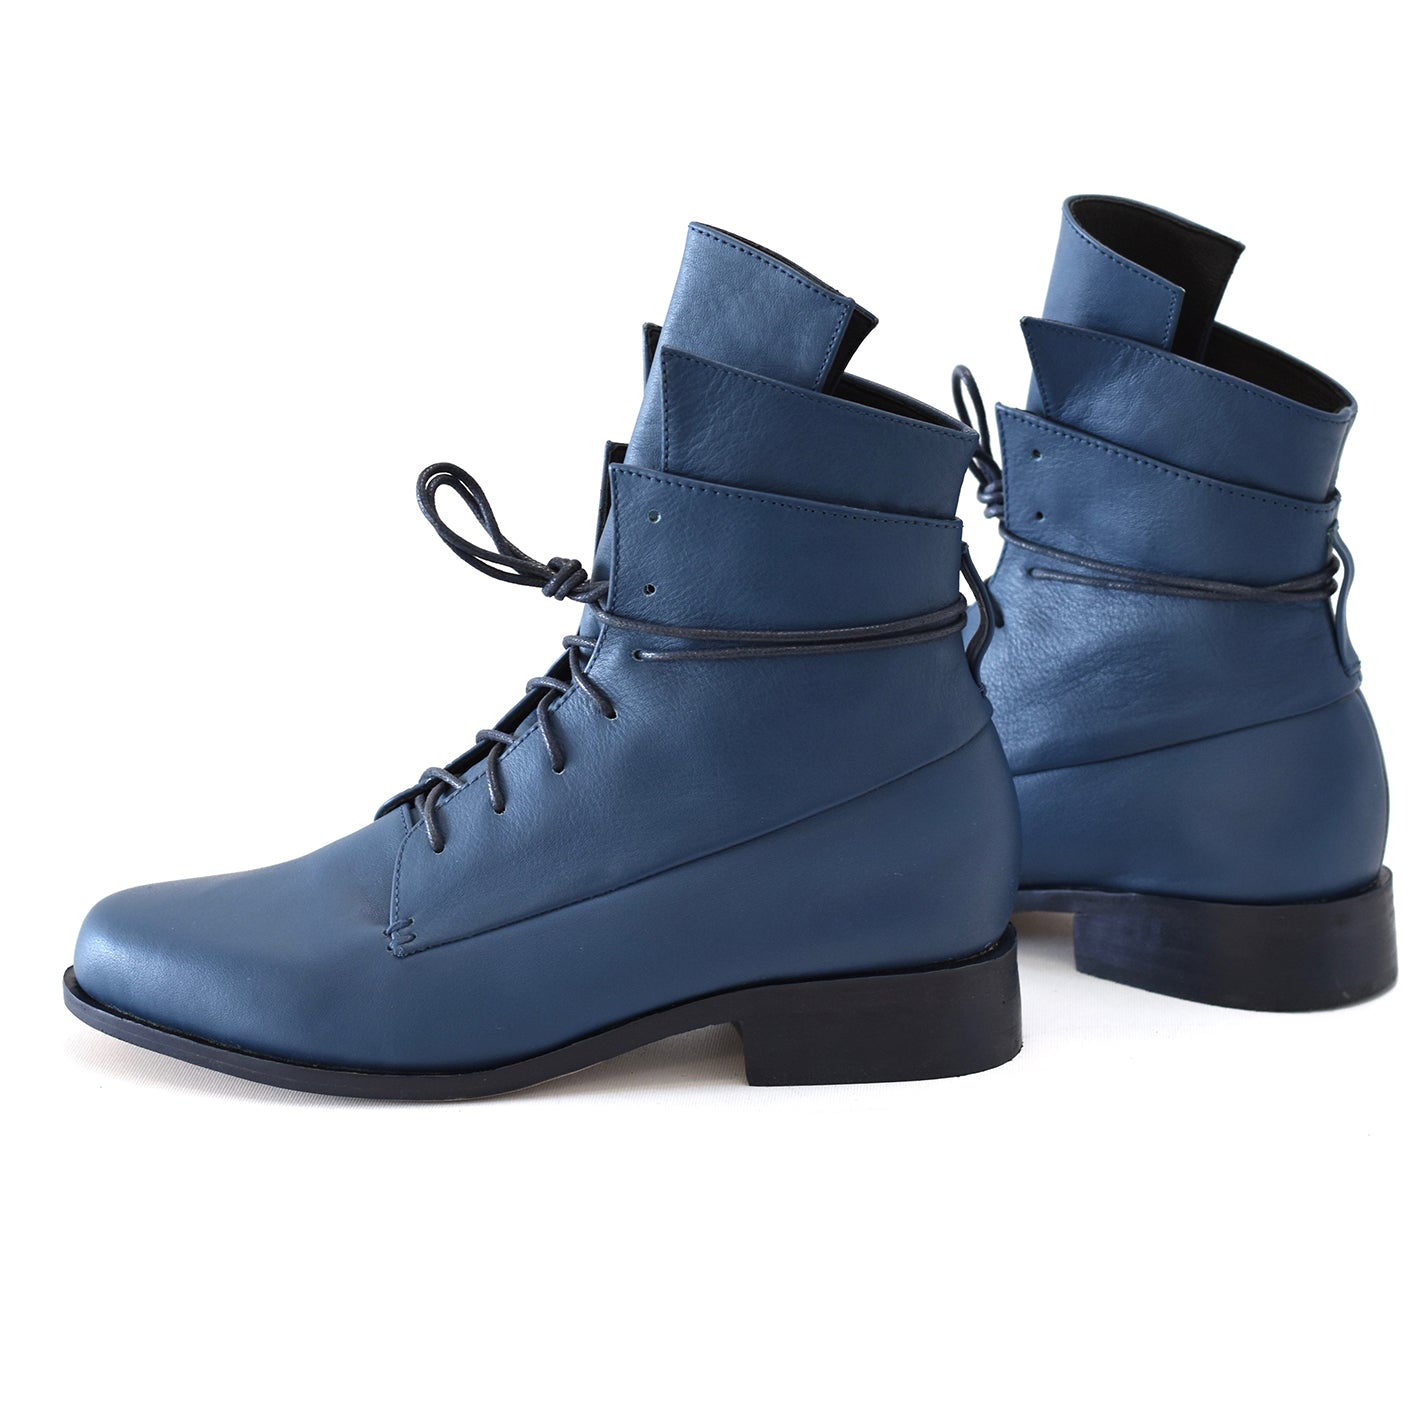 The Striker Boot Saxe Blue, 25mm leather covered heel with waxed laces